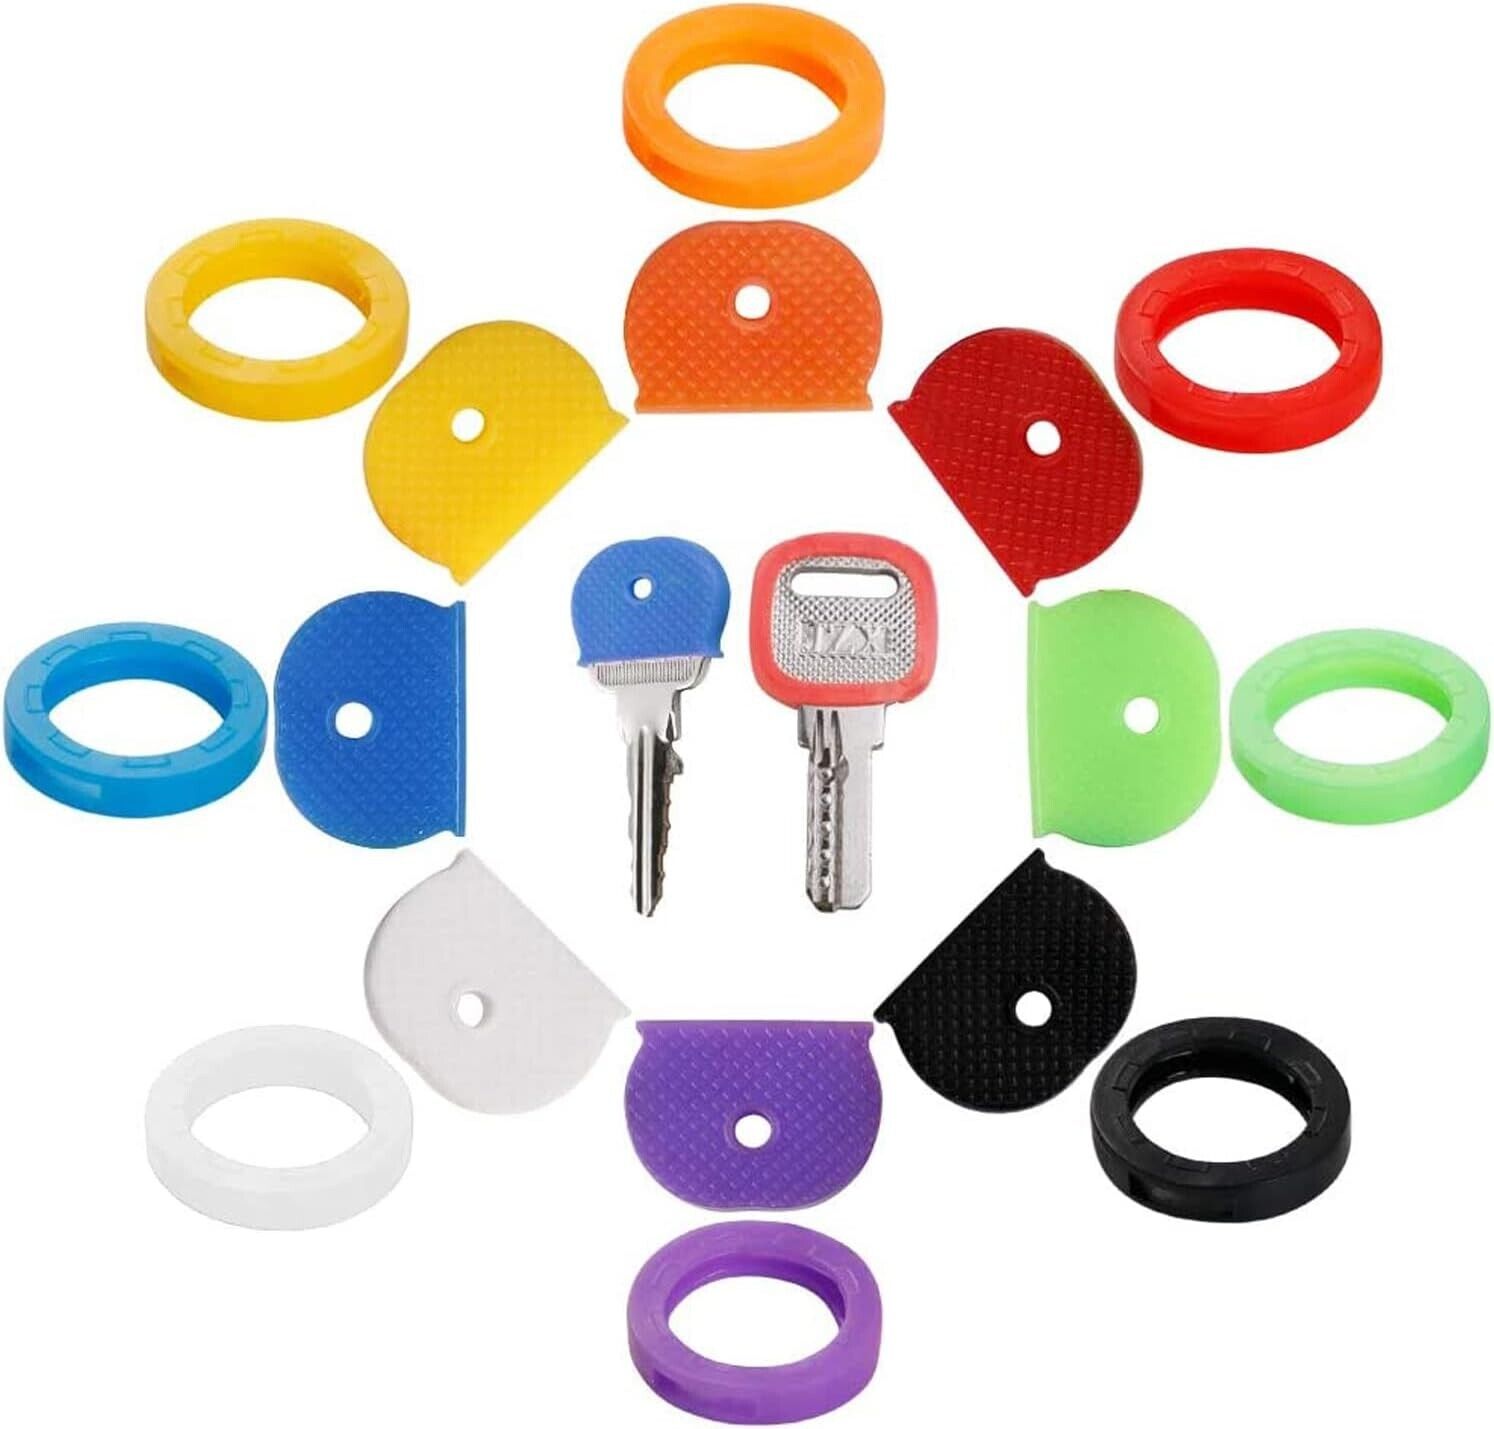 32 pcs Key Caps Covers Tags Ring Combination Set Color Coded House Key ID Tags